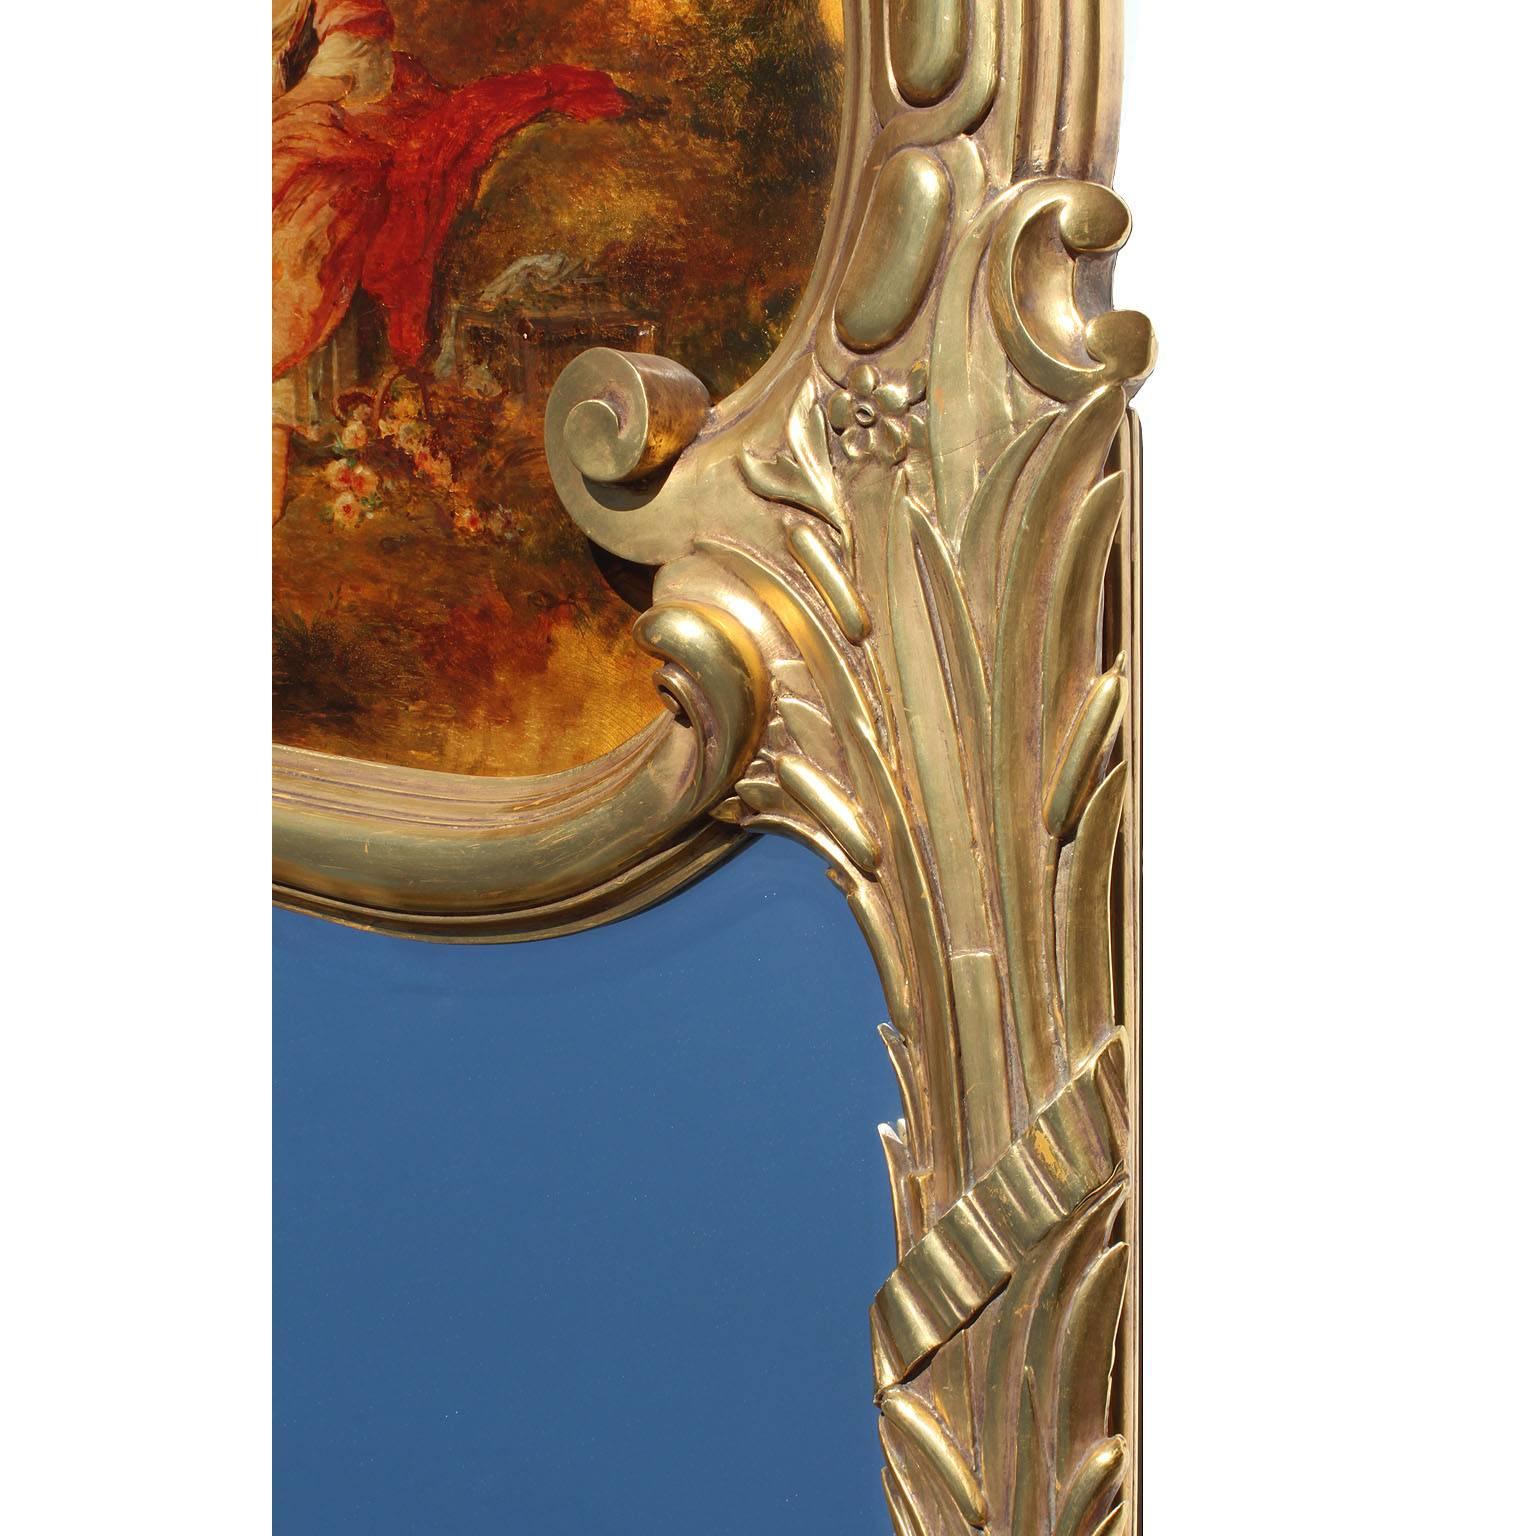 French 19th-20th Century Louis XV Style Giltwood Carved Figural Trumeau Mirror For Sale 2